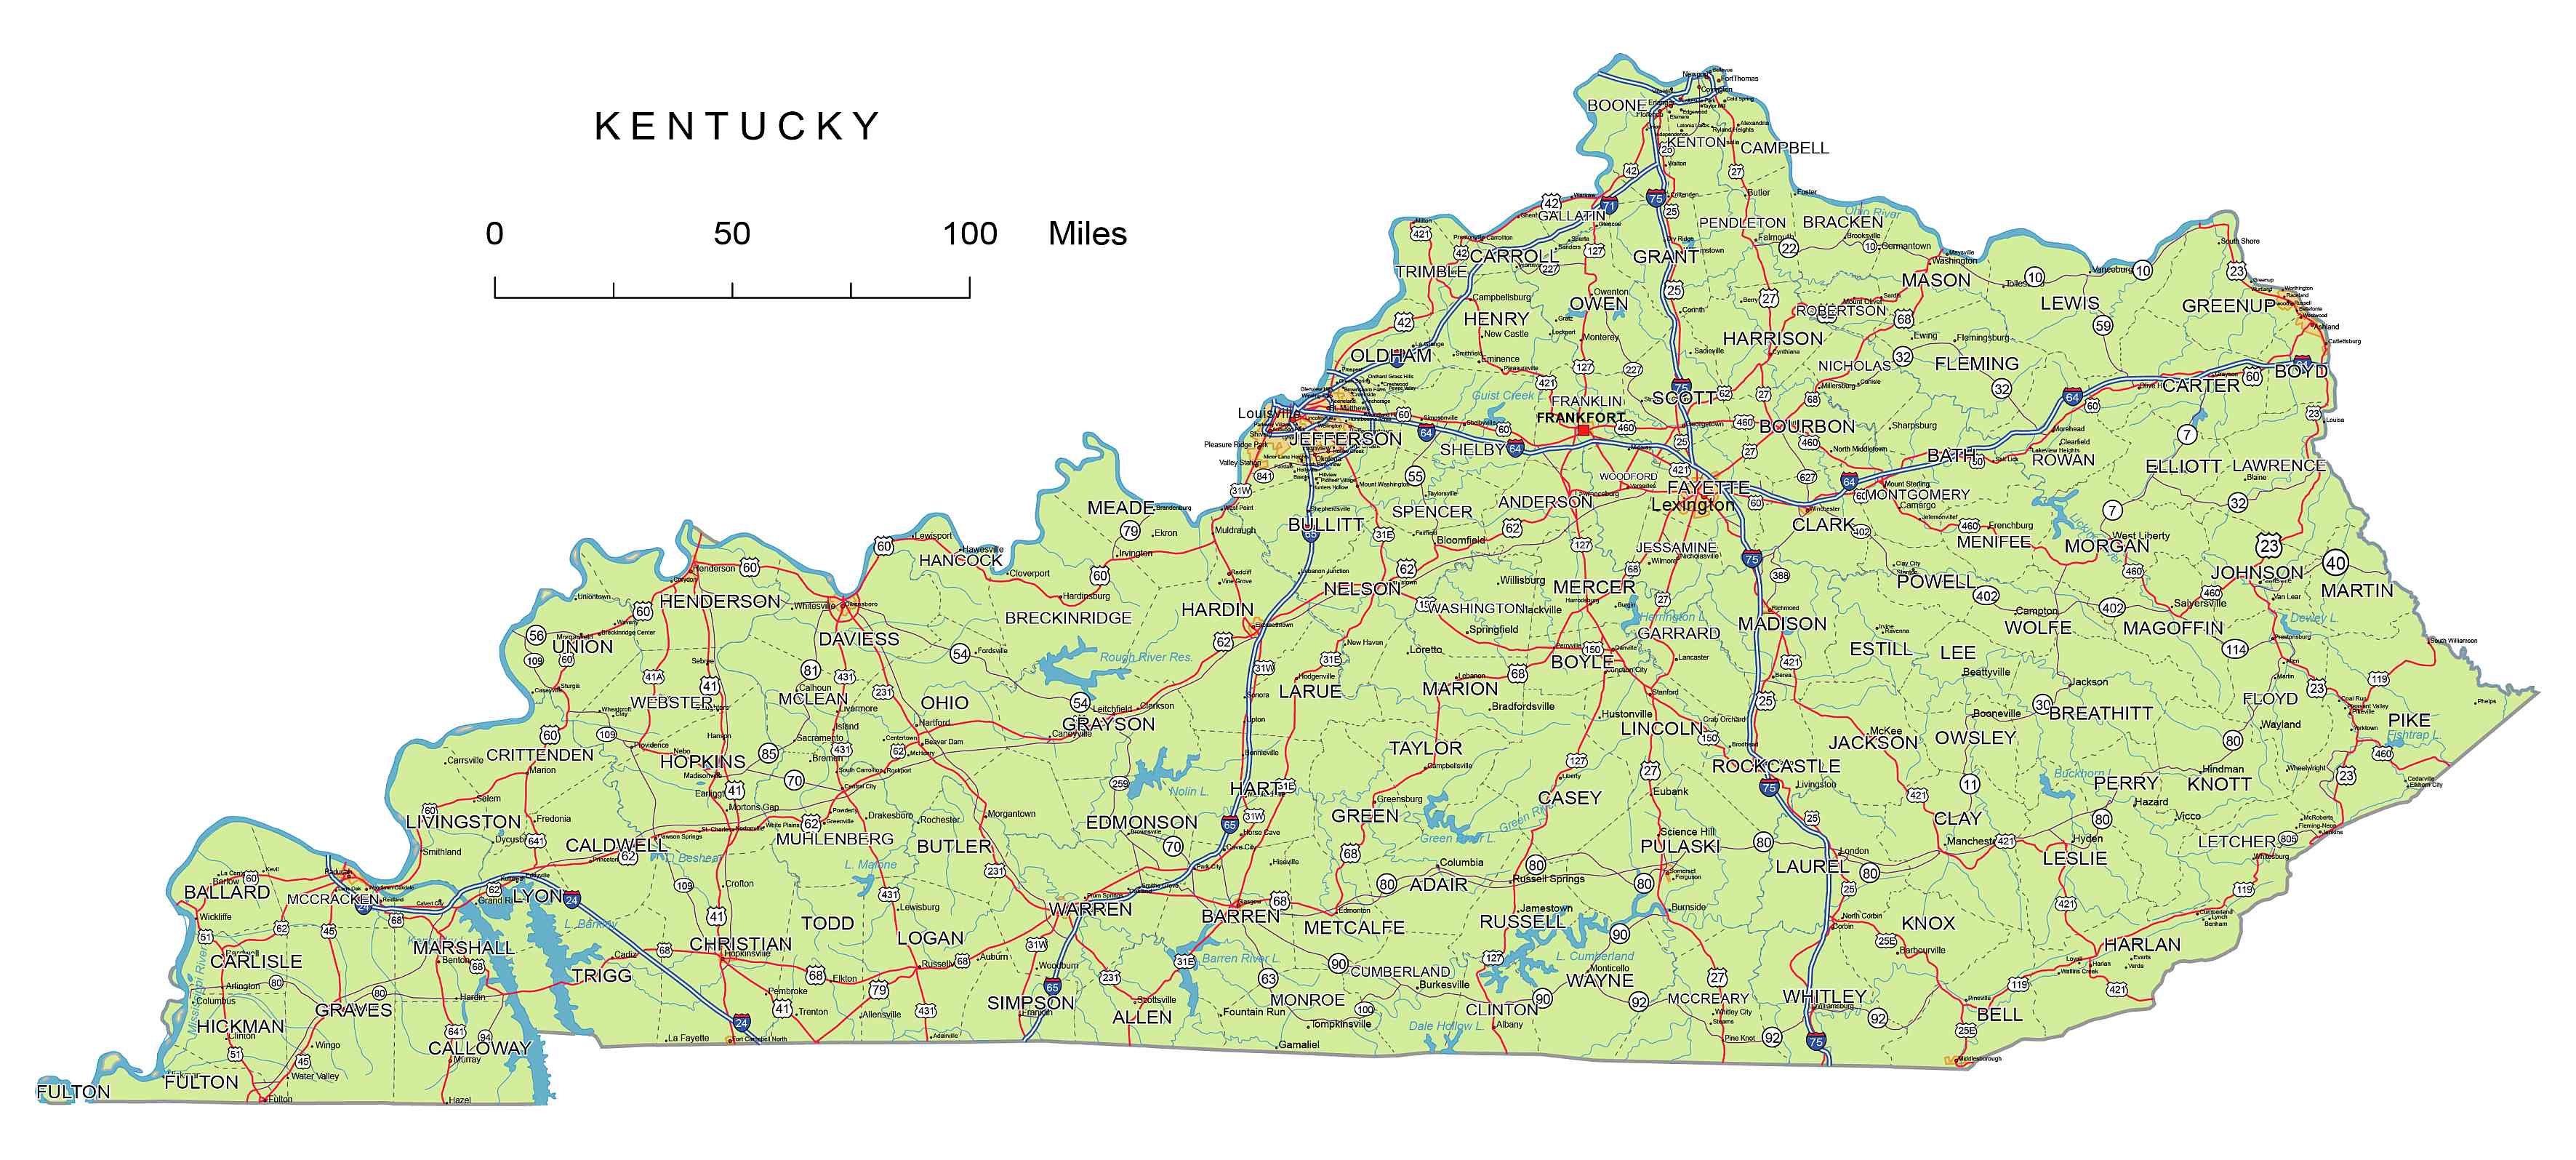 kentucky-county-map-with-roads